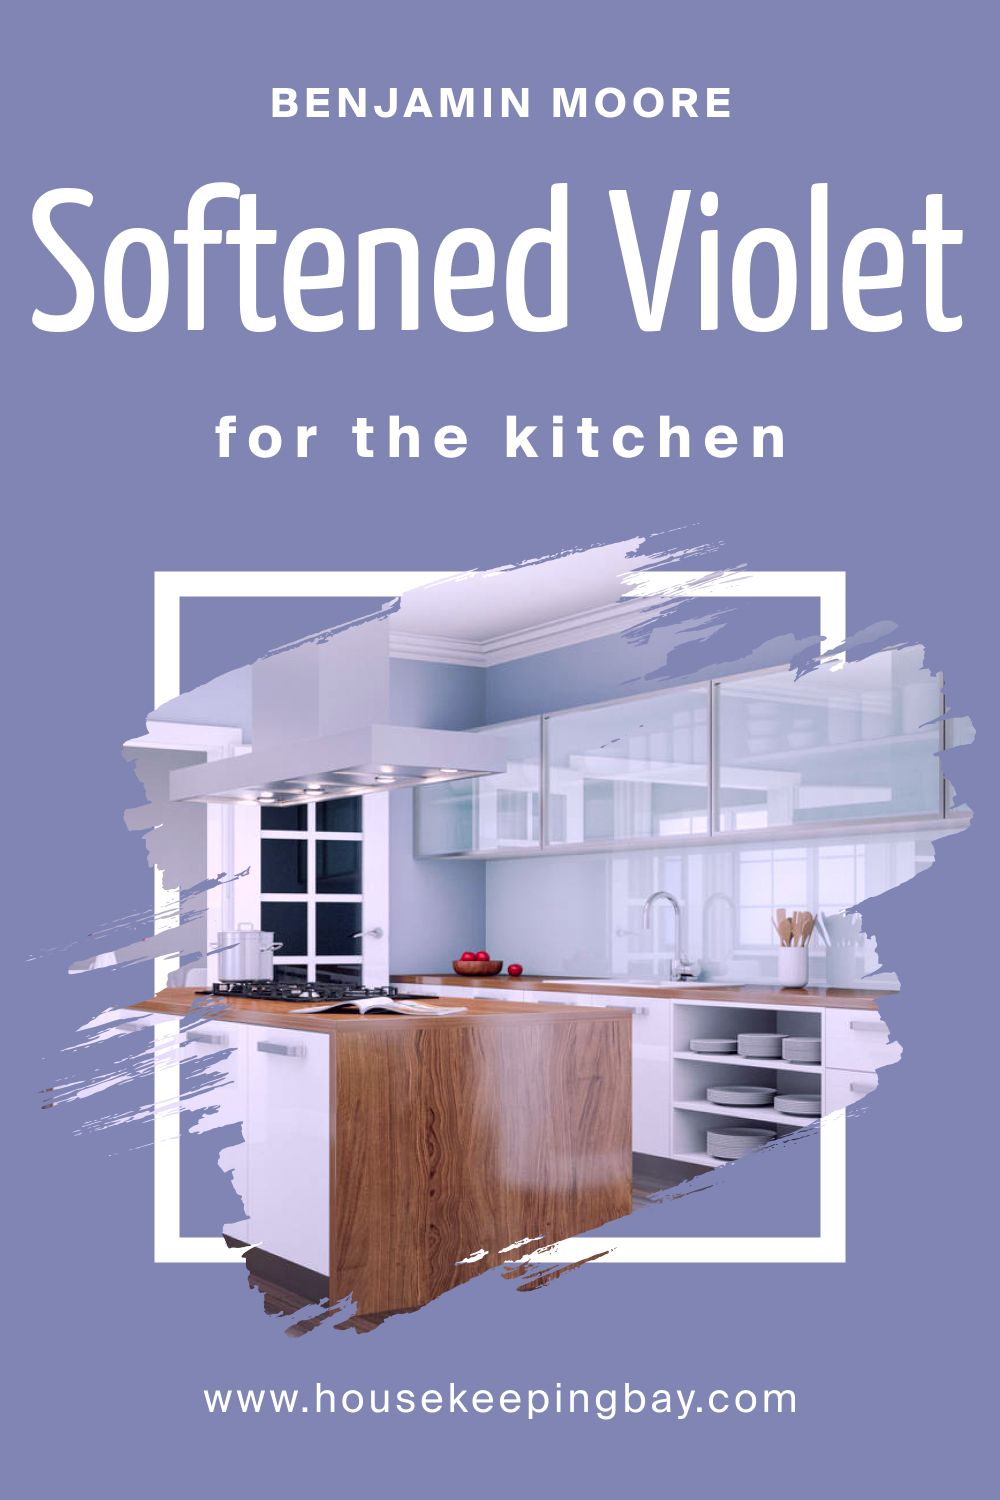 How to Use BM Softened Violet 1420 in the Kitchen?